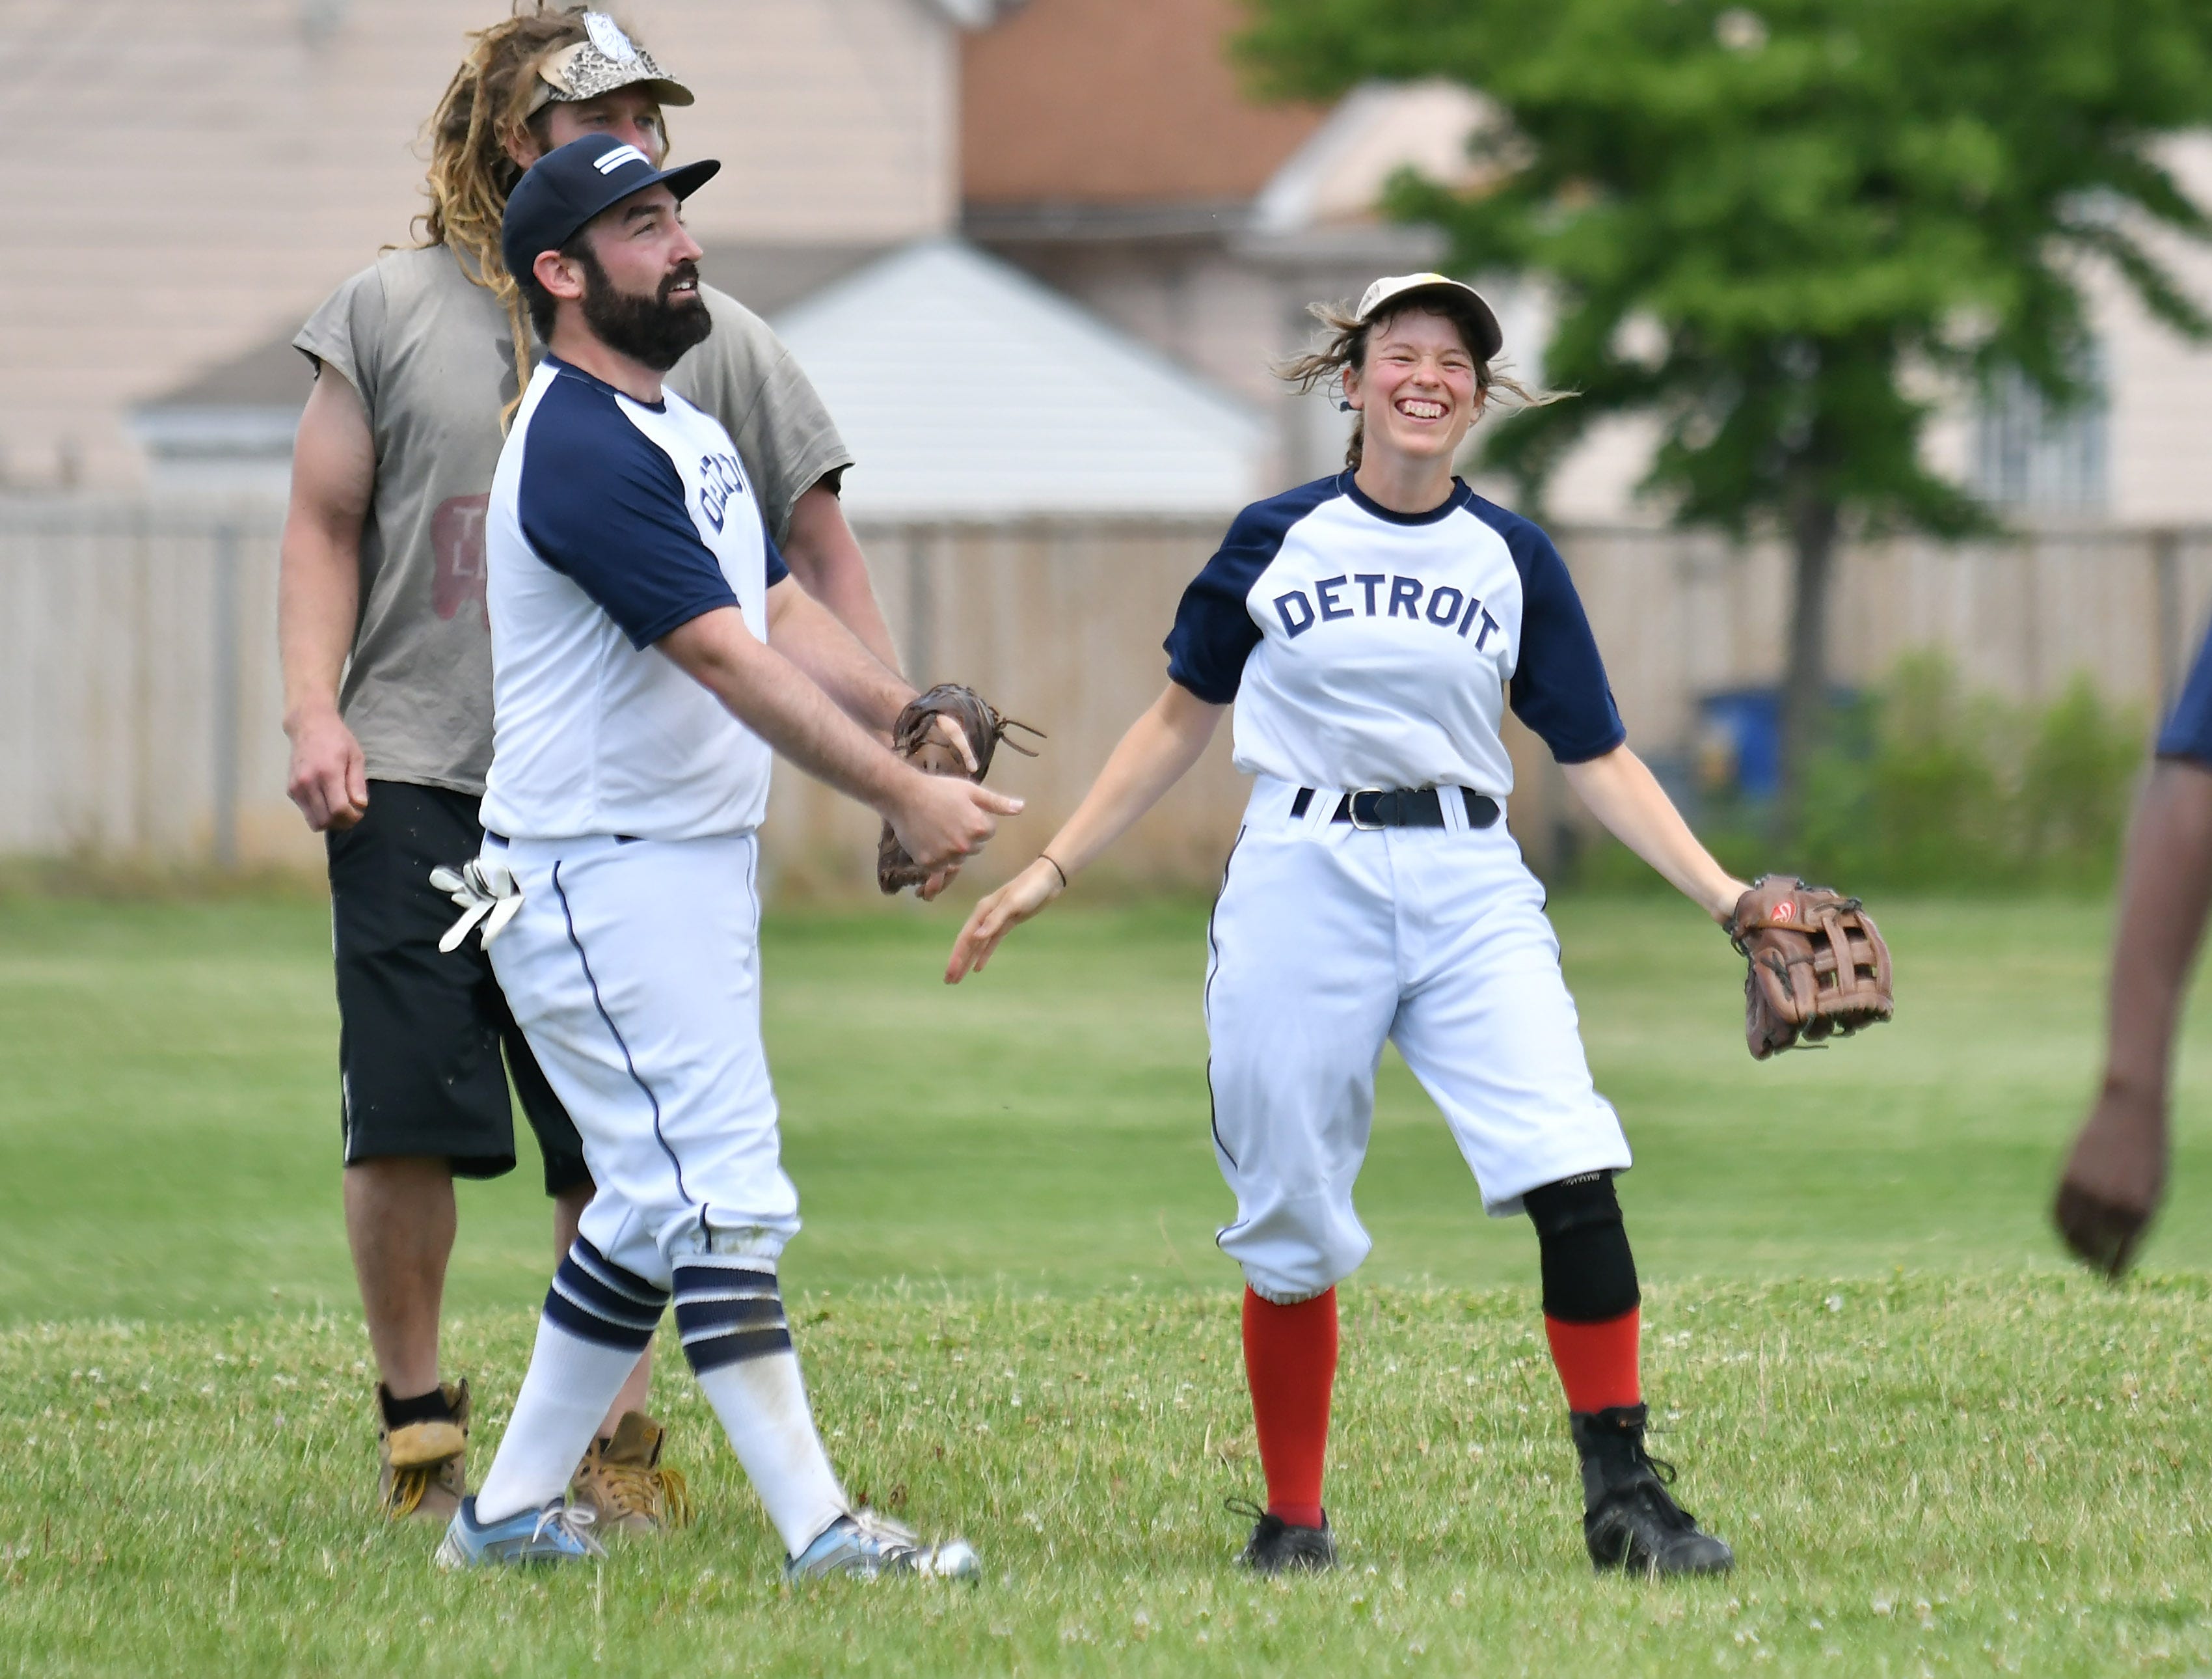 Tony Paris of Hamtramck and Lou Setzler, 32, of Detroit react after a successful run down getting the out on the Warstic baserunner.